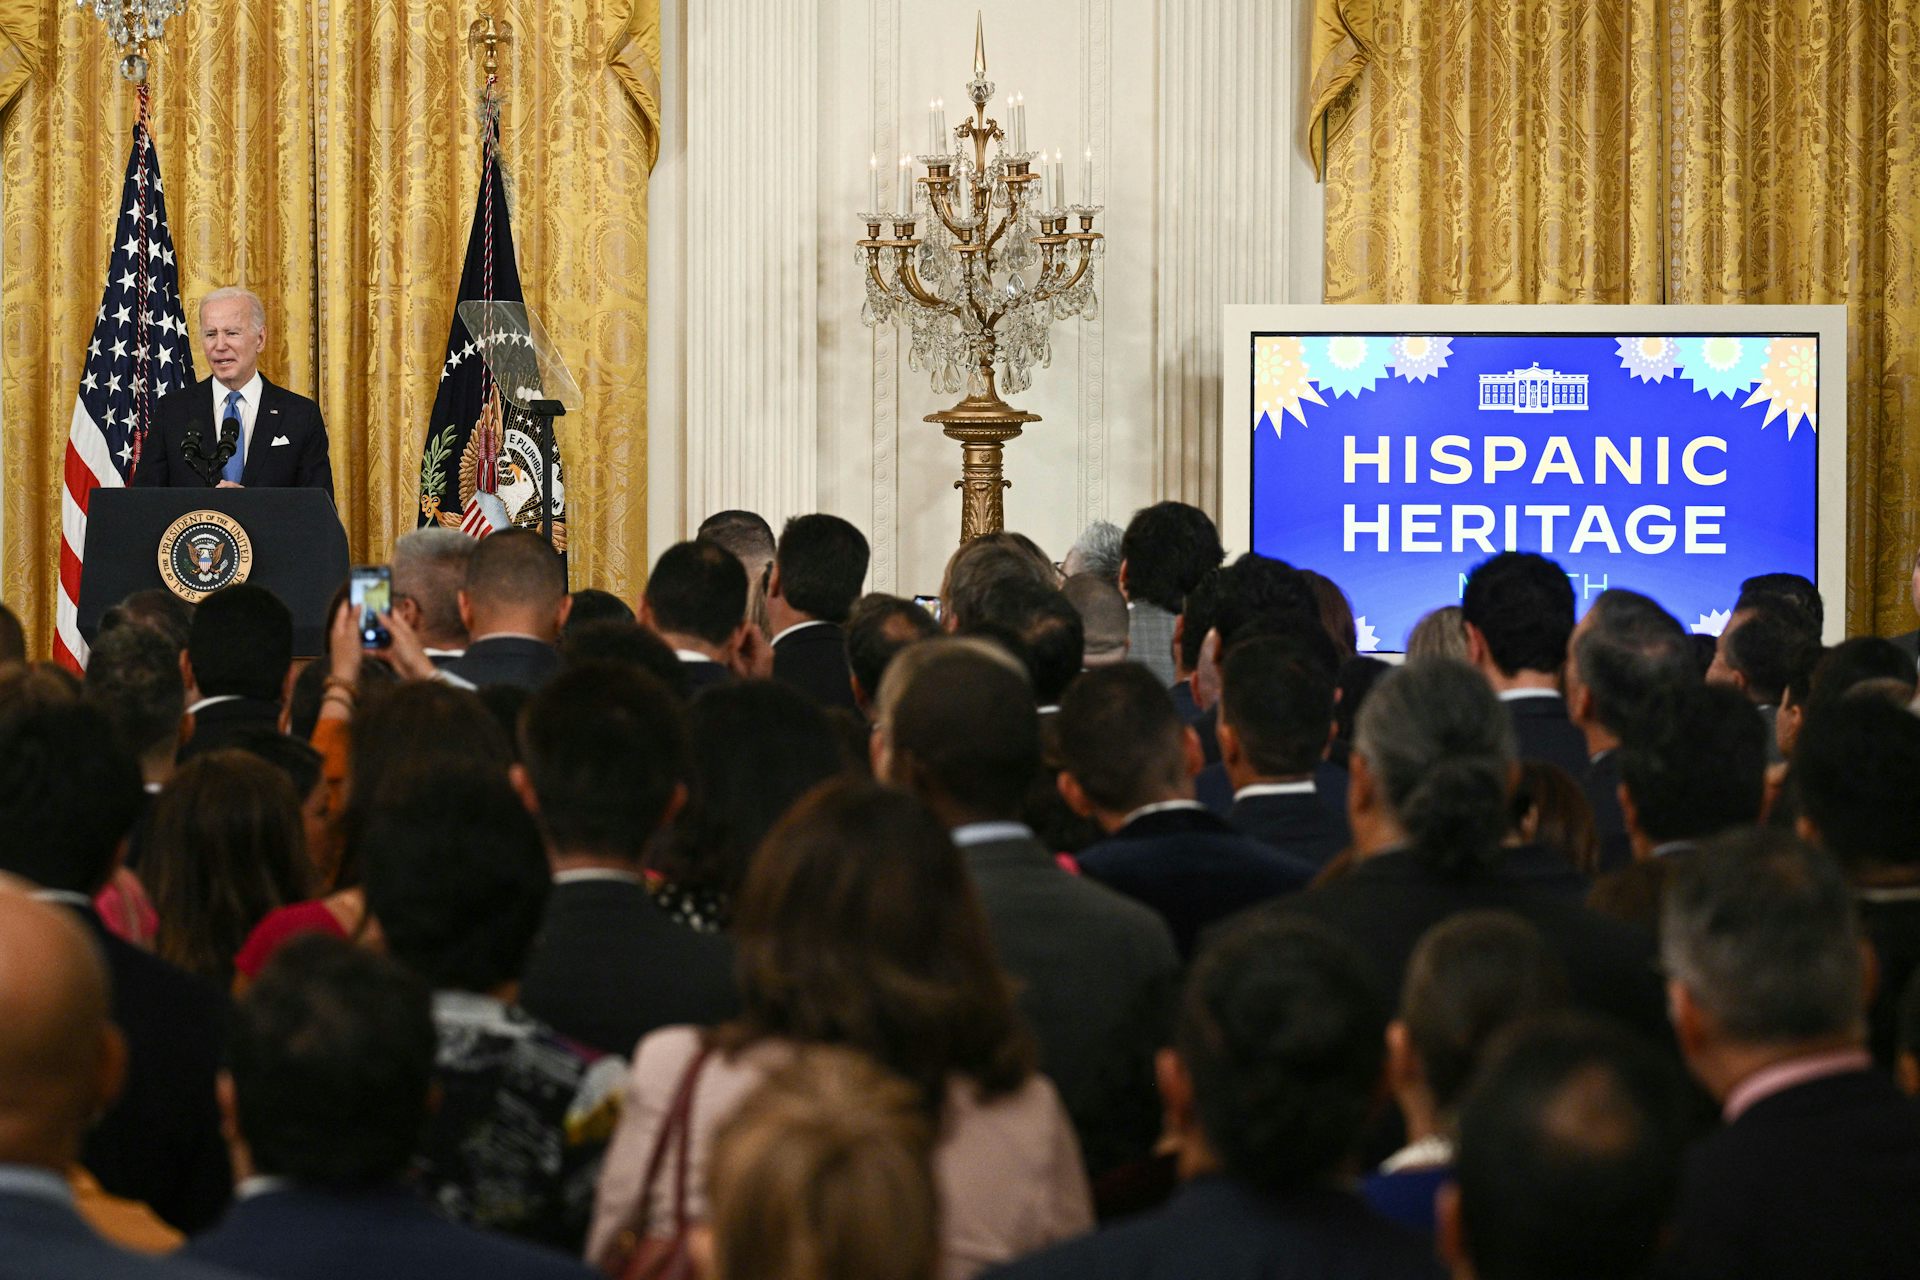 Census Data Hides Racial Diversity of U.S. ‘Hispanics’ – to the Country’s Detriment